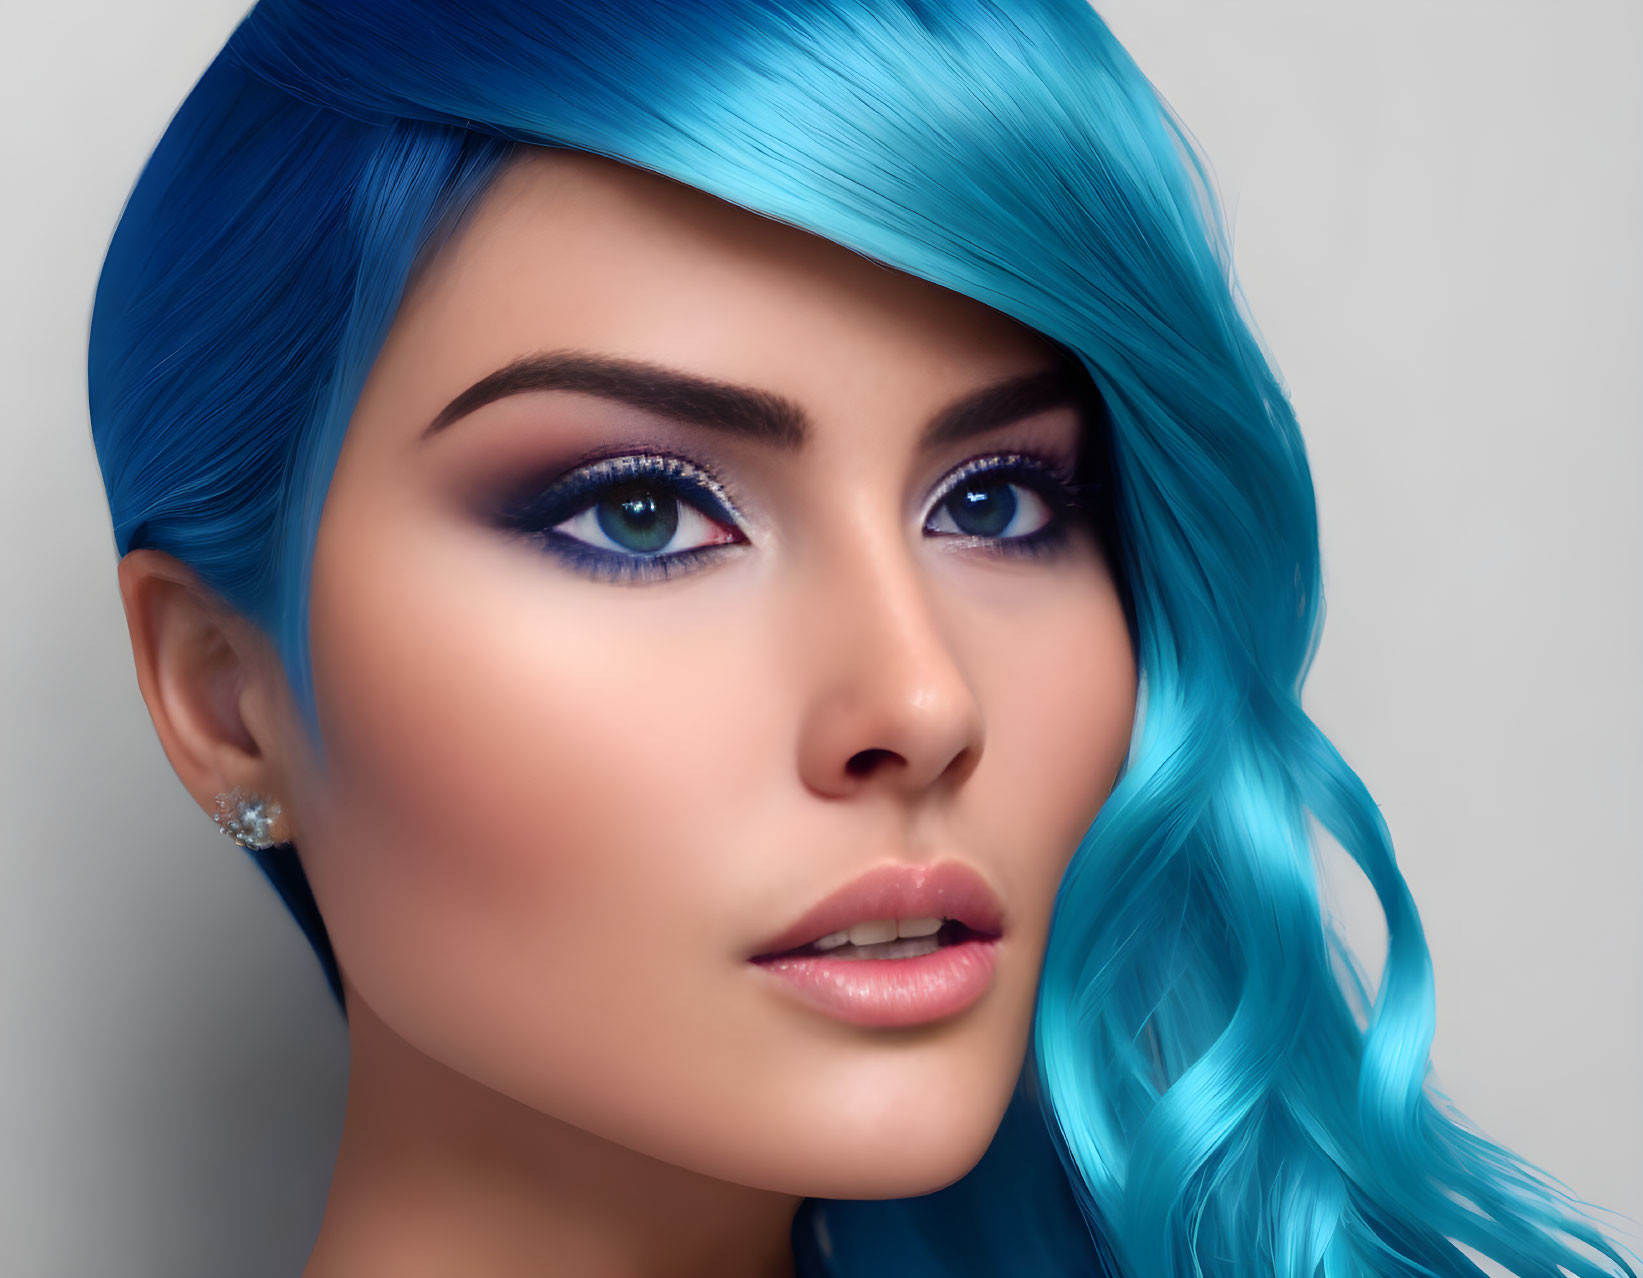 Portrait of a person with vibrant blue hair and eyes on neutral background